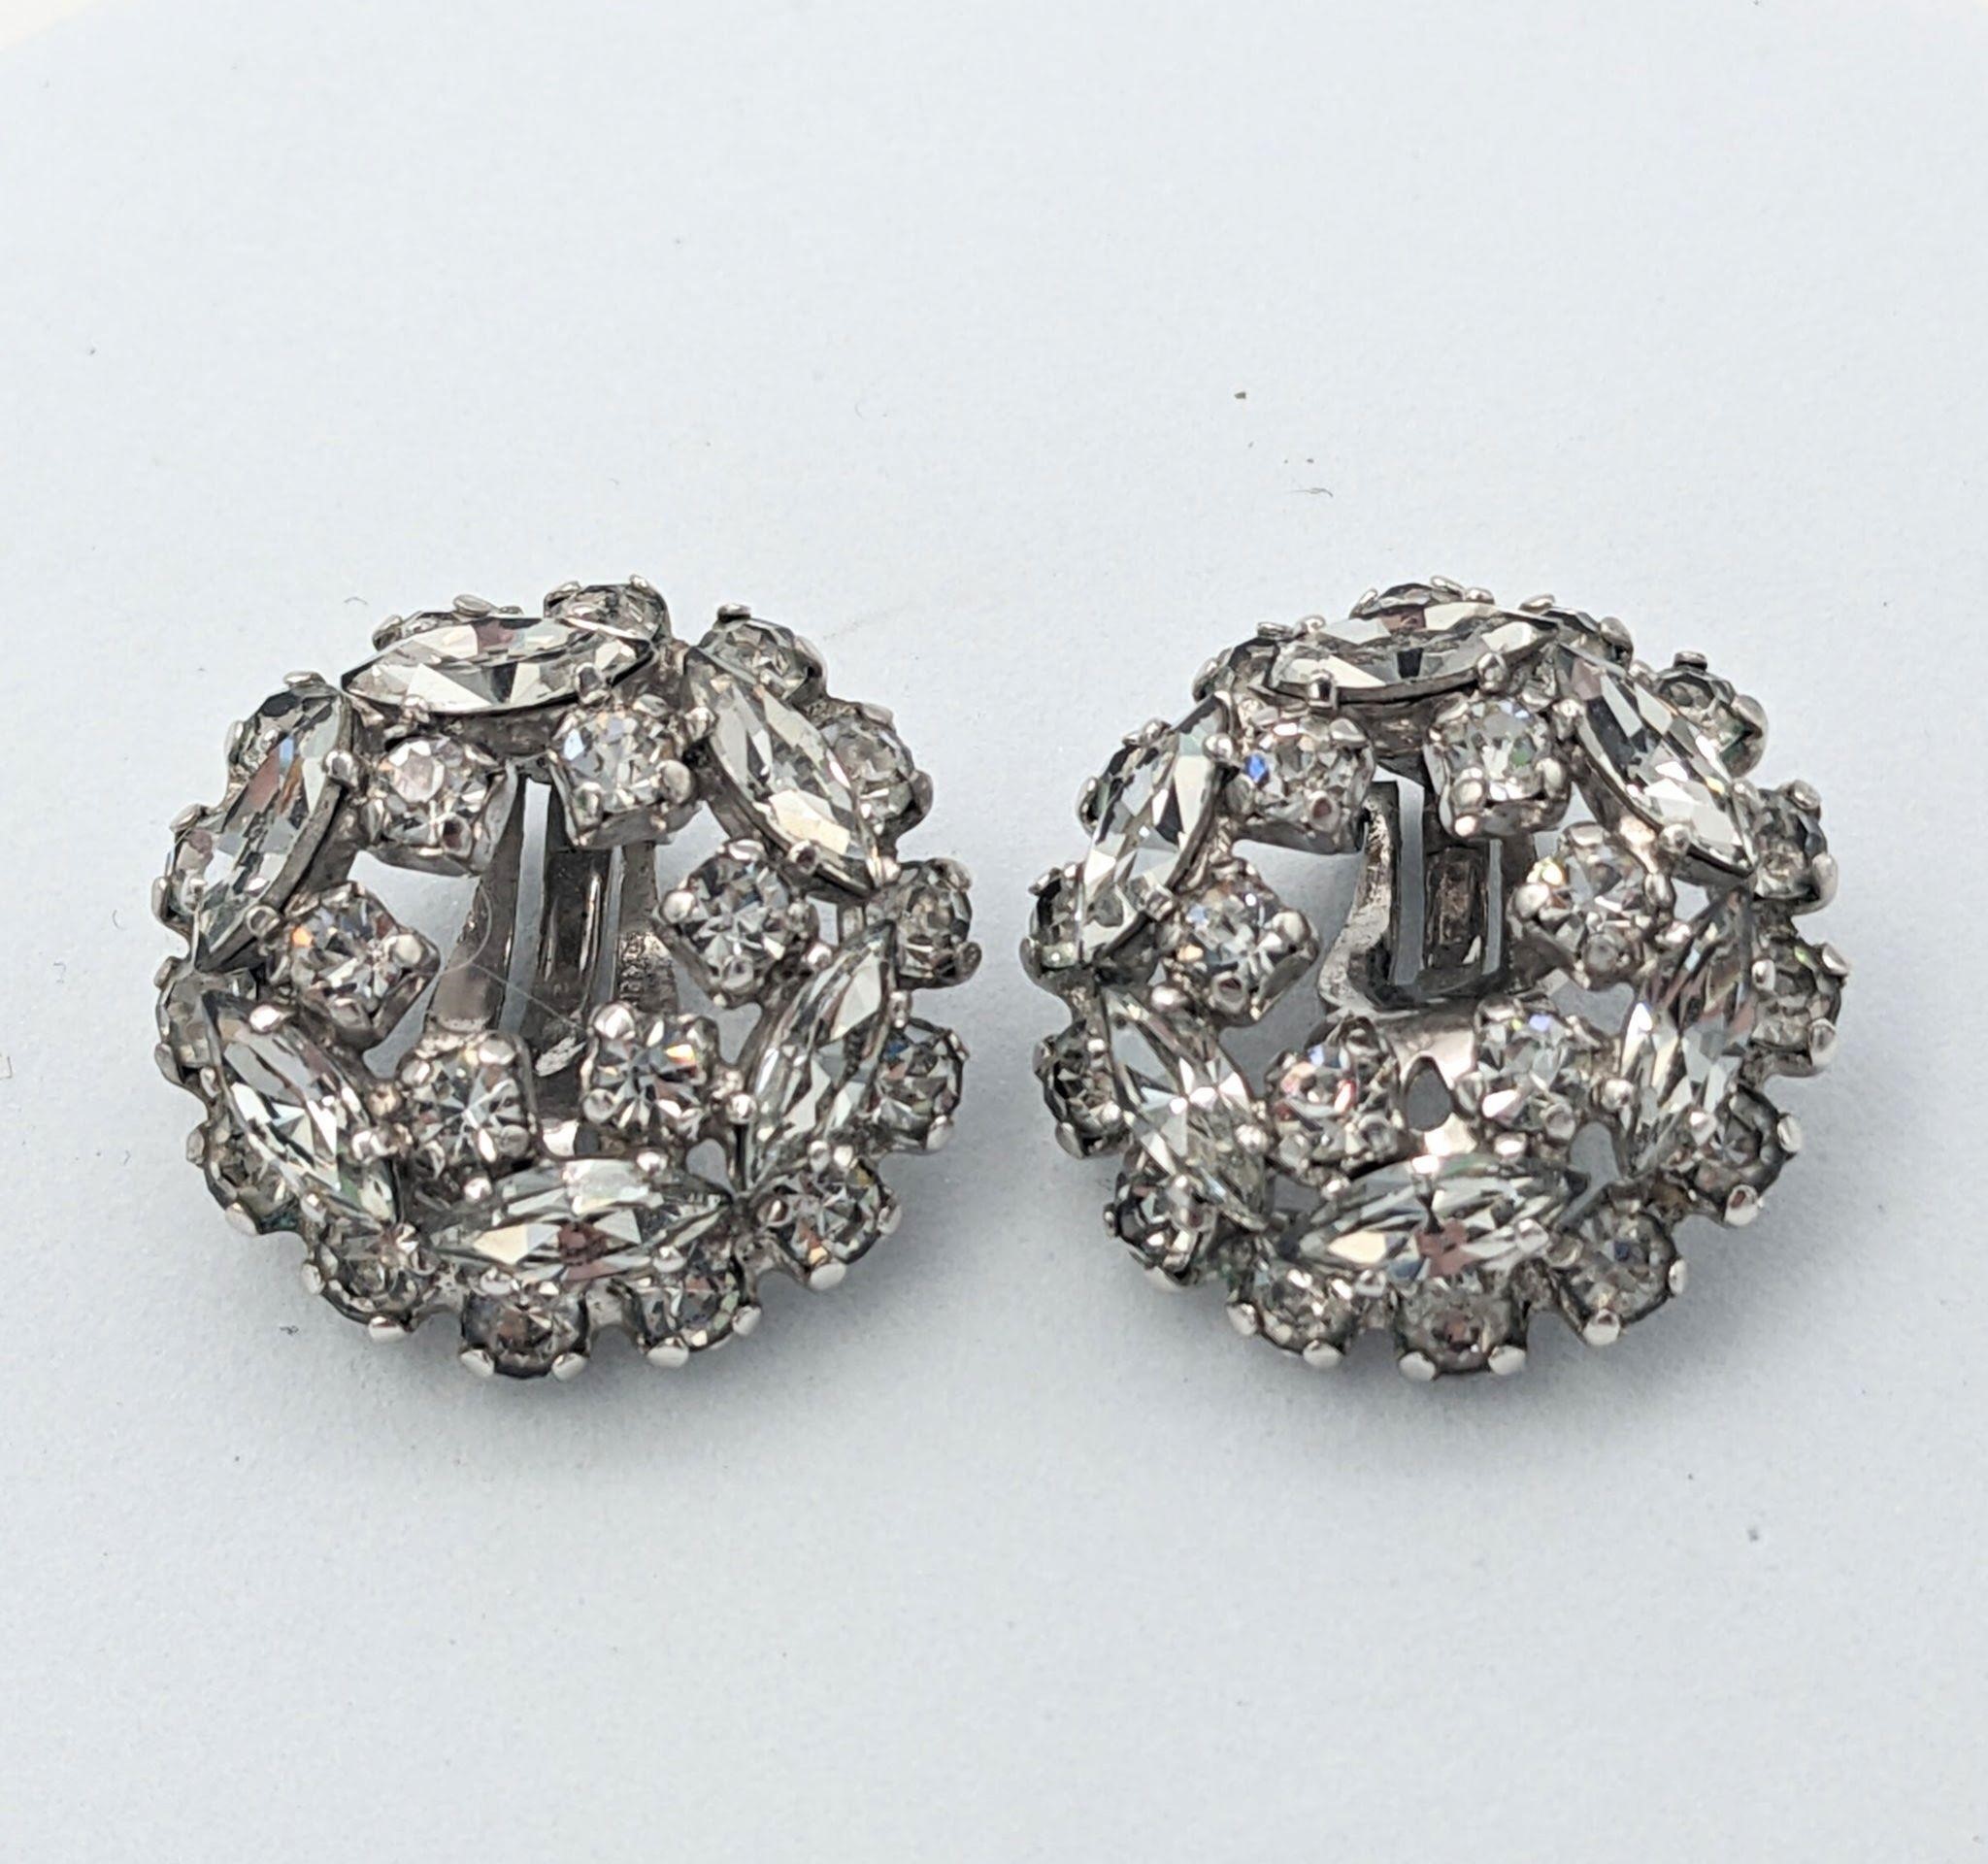 Sherman Ice Crystal Round Two Tier Earrings